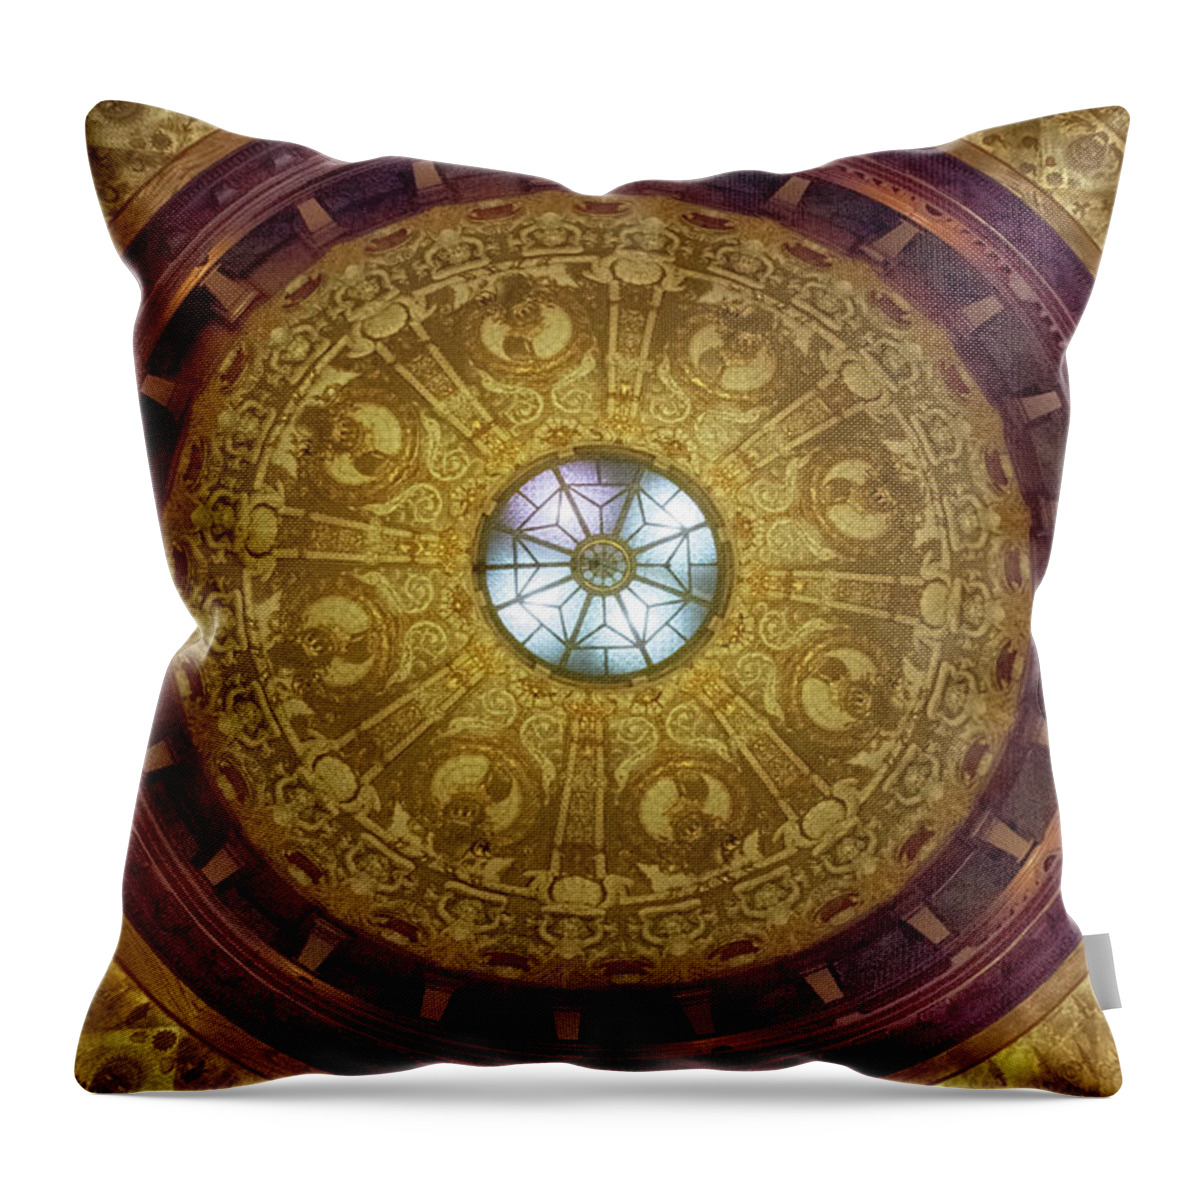 Flagler Throw Pillow featuring the photograph Flagler College Ceiling by Mitch Spence